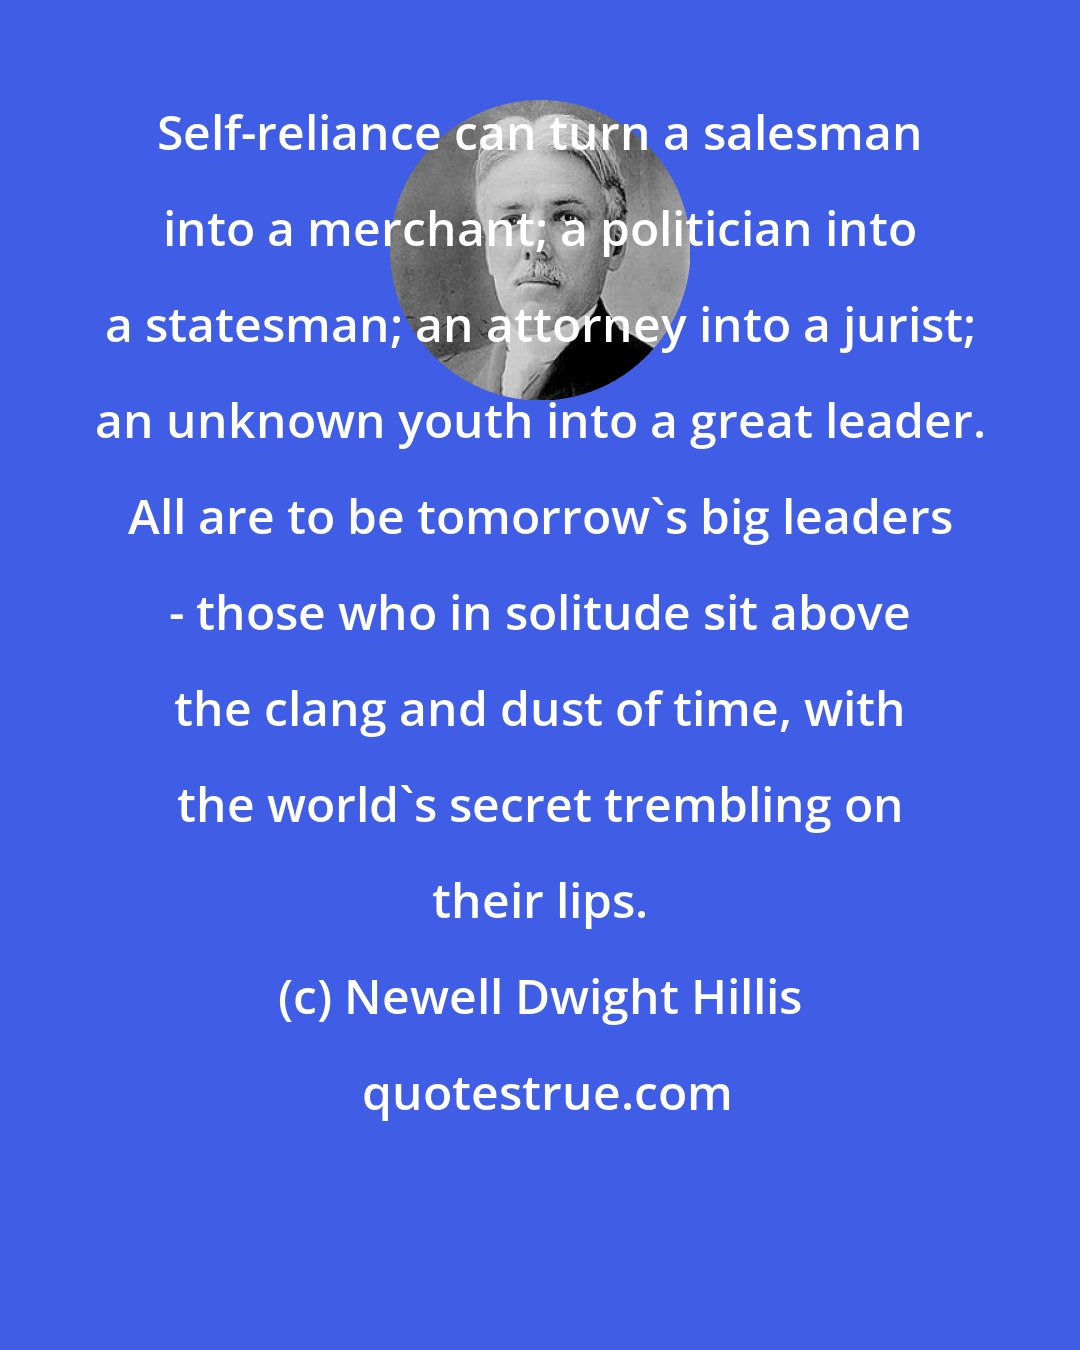 Newell Dwight Hillis: Self-reliance can turn a salesman into a merchant; a politician into a statesman; an attorney into a jurist; an unknown youth into a great leader. All are to be tomorrow's big leaders - those who in solitude sit above the clang and dust of time, with the world's secret trembling on their lips.